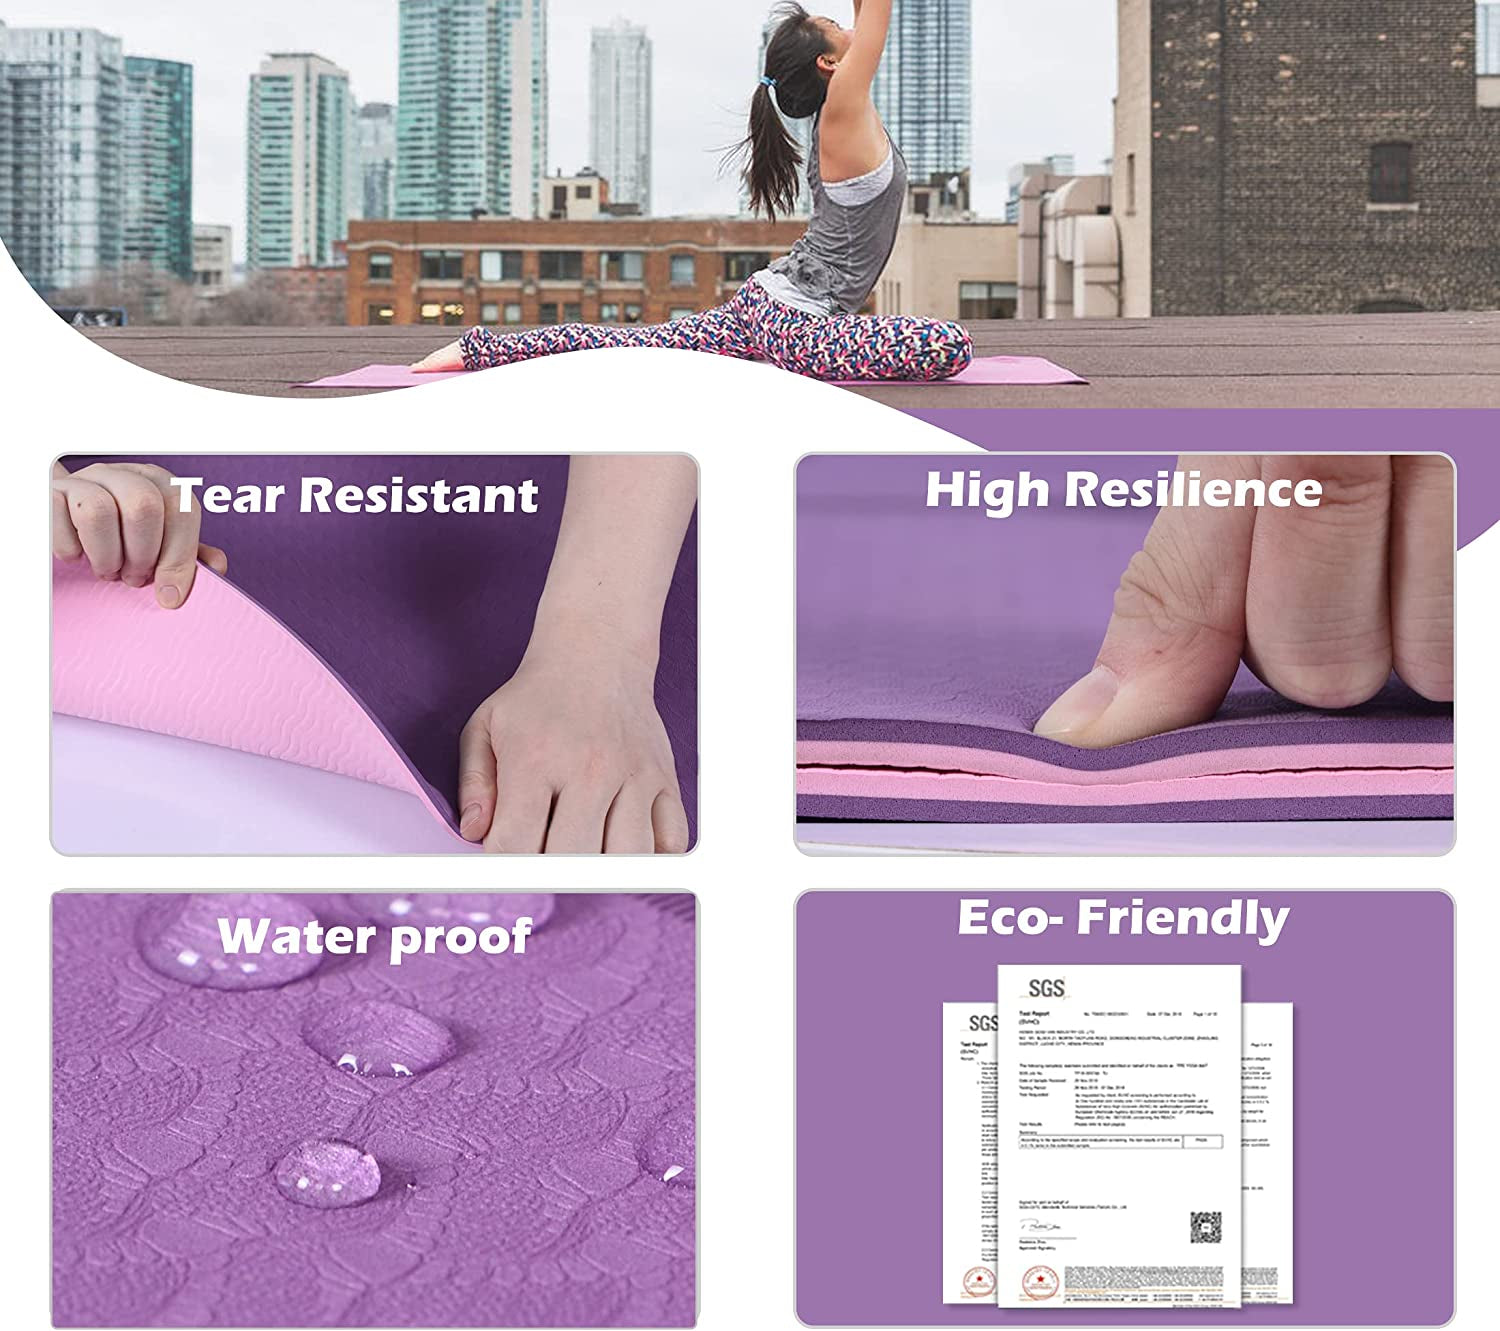 Premium Non-Slip Yoga Mat for Women - Eco-Friendly, Anti-Tear 1/4" Thick Pilates and Fitness Mat with Carrying Sling and Storage Bag, Ideal for Home Workouts